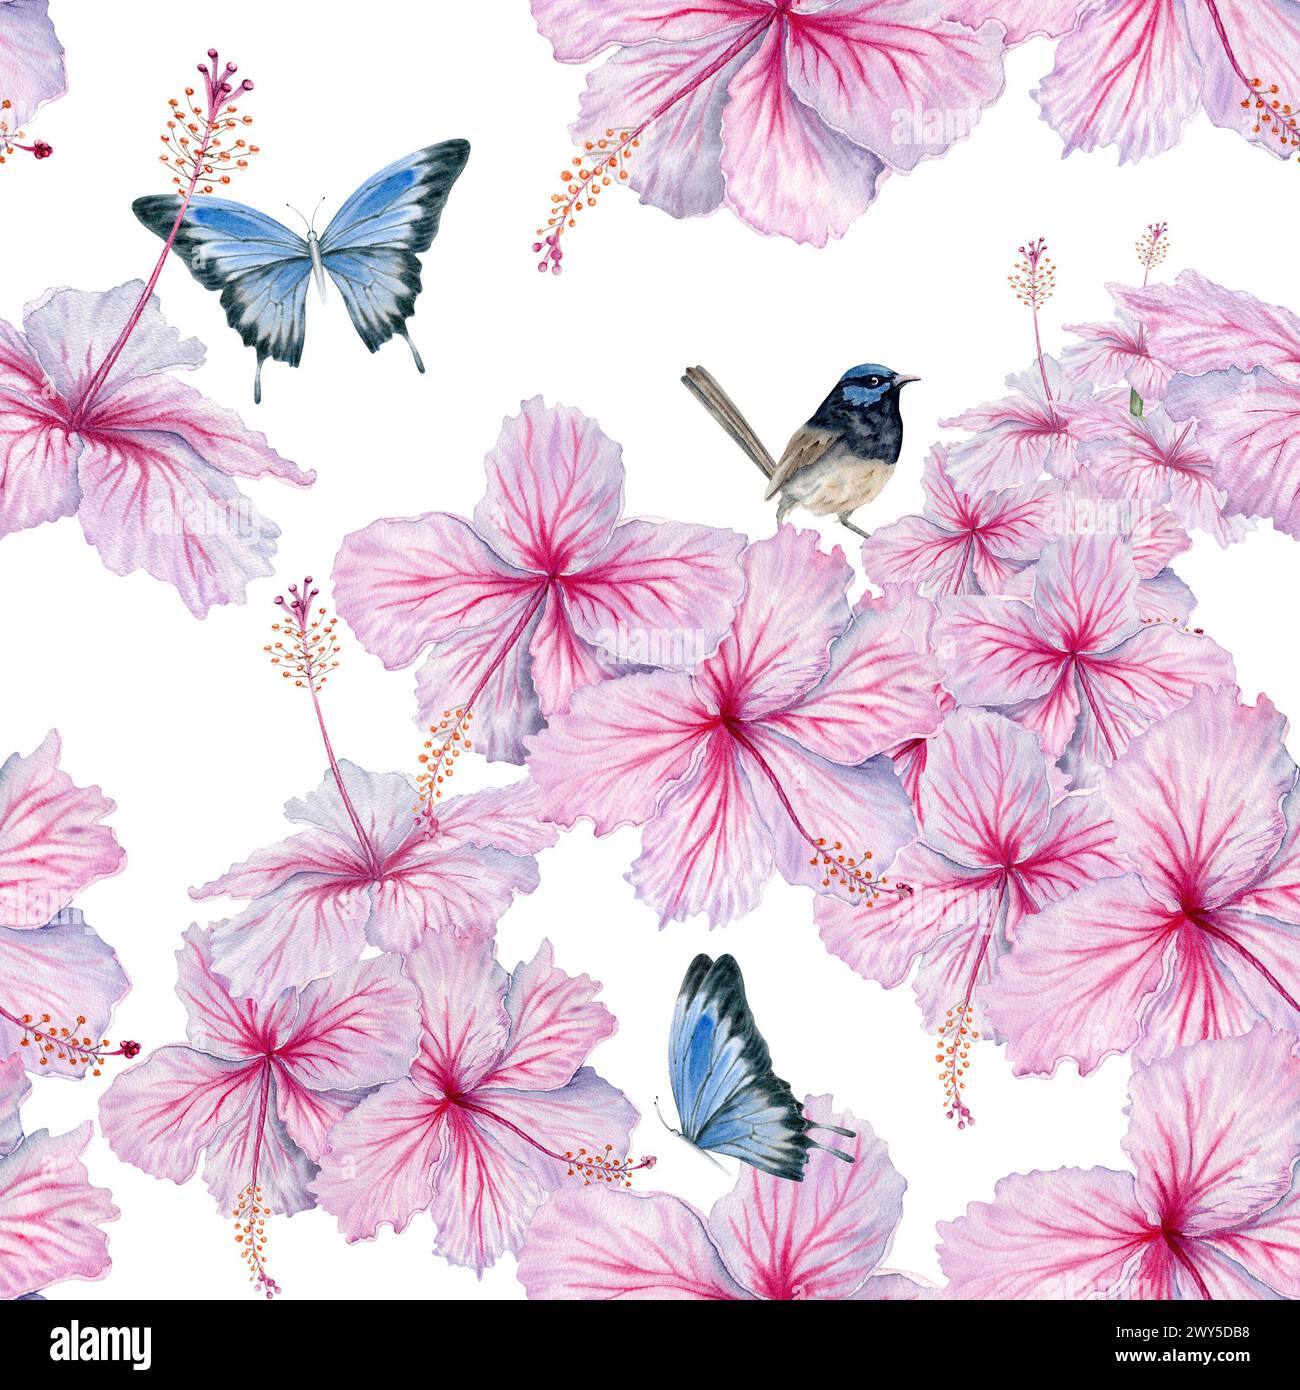 Watercolor pink hibiscus flowers with butterflies and birds seamless pattern. Floral composition on white background. For tea and syrup. Cosmetics Stock Photo